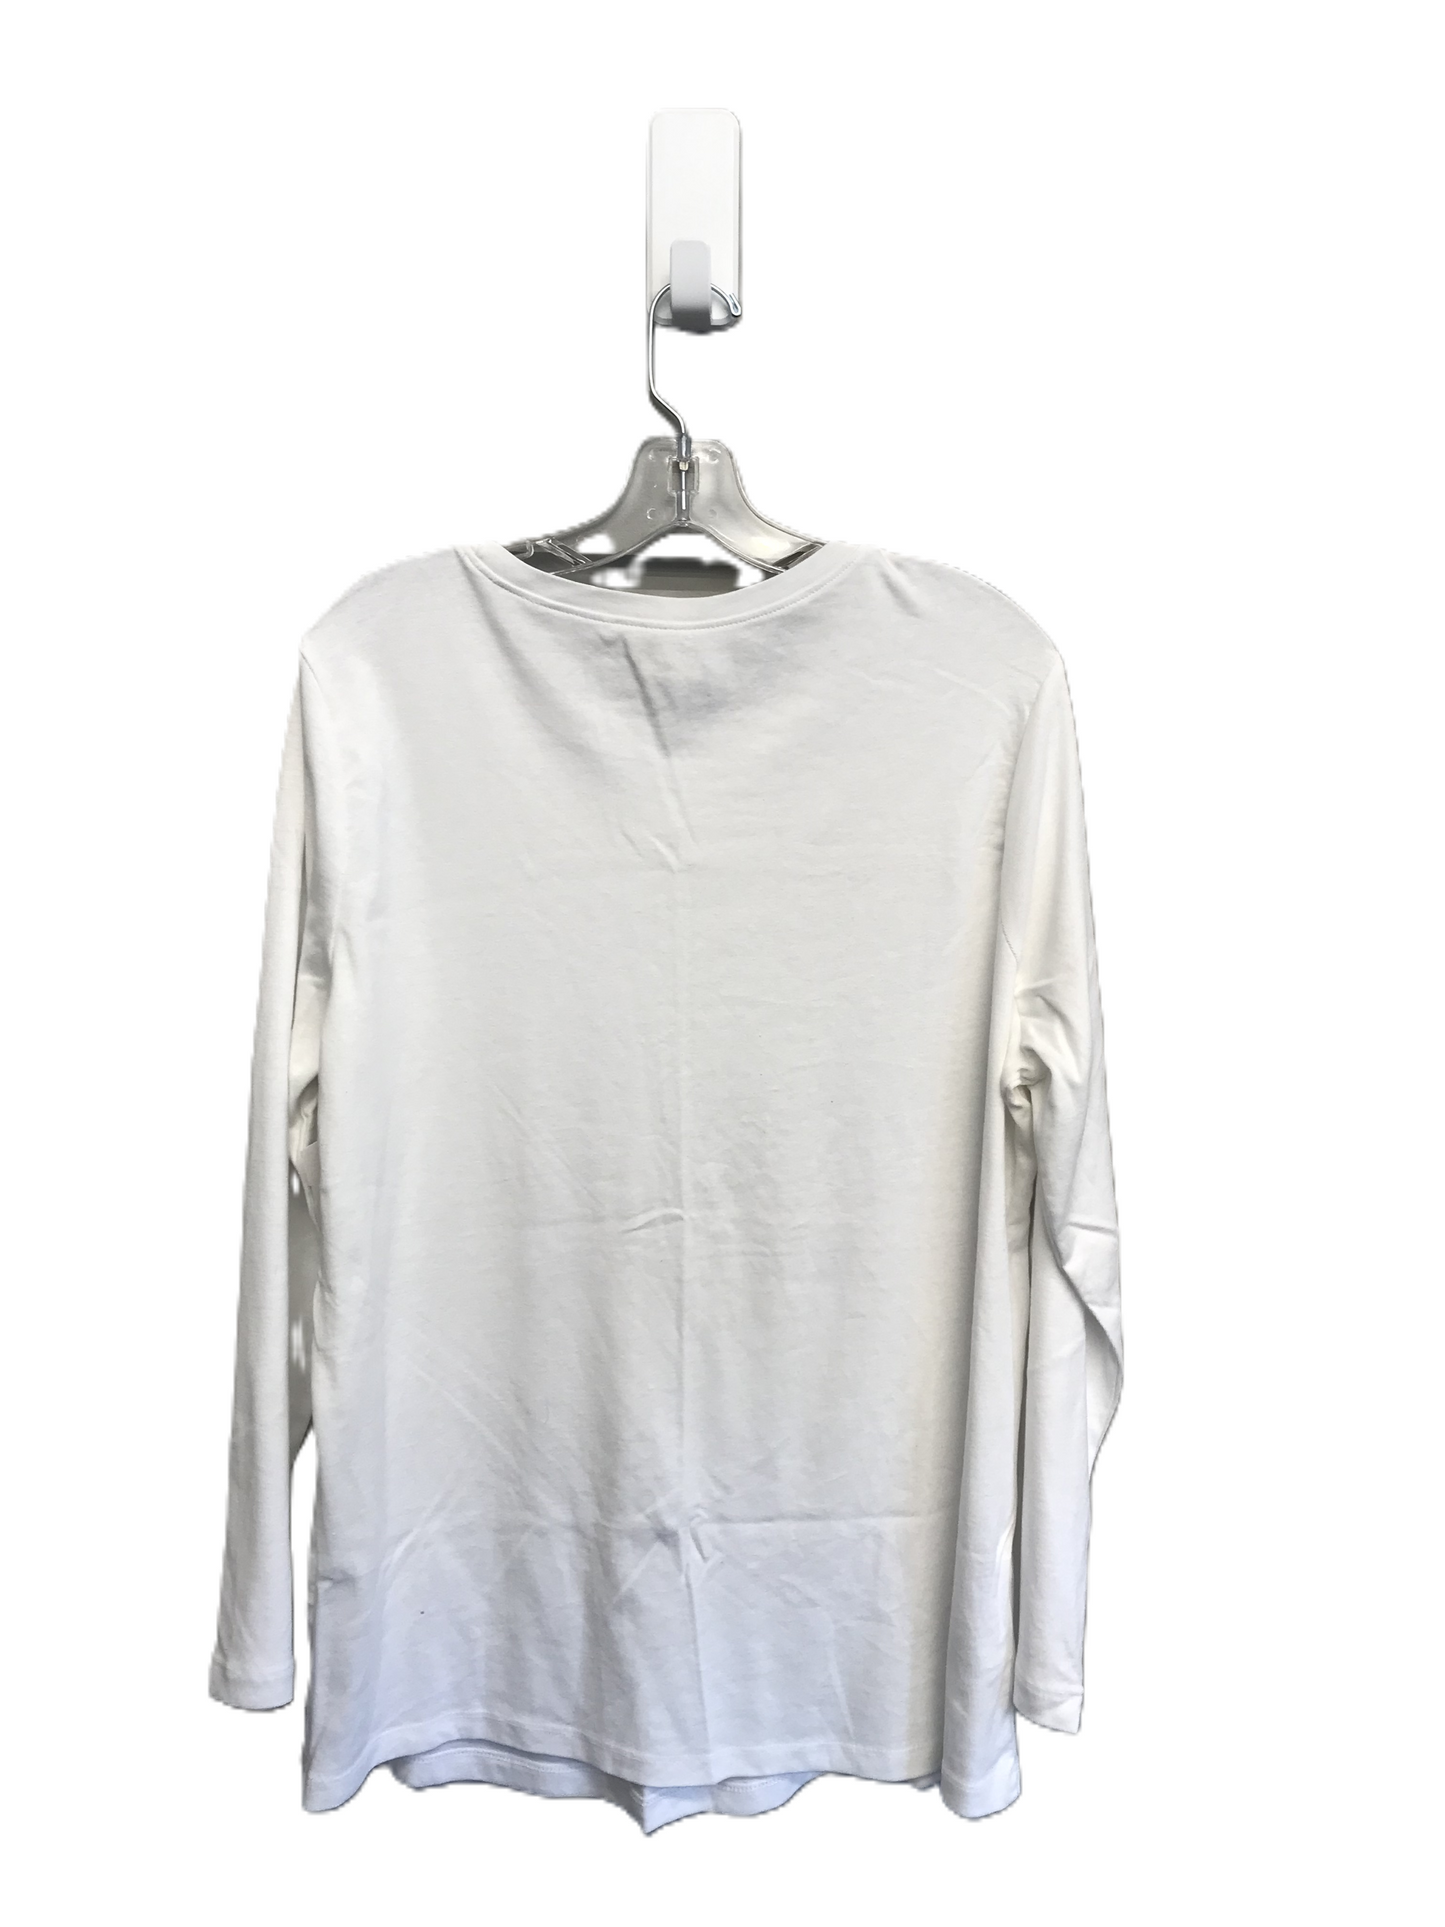 White Top Long Sleeve Basic By Eddie Bauer, Size: 2x